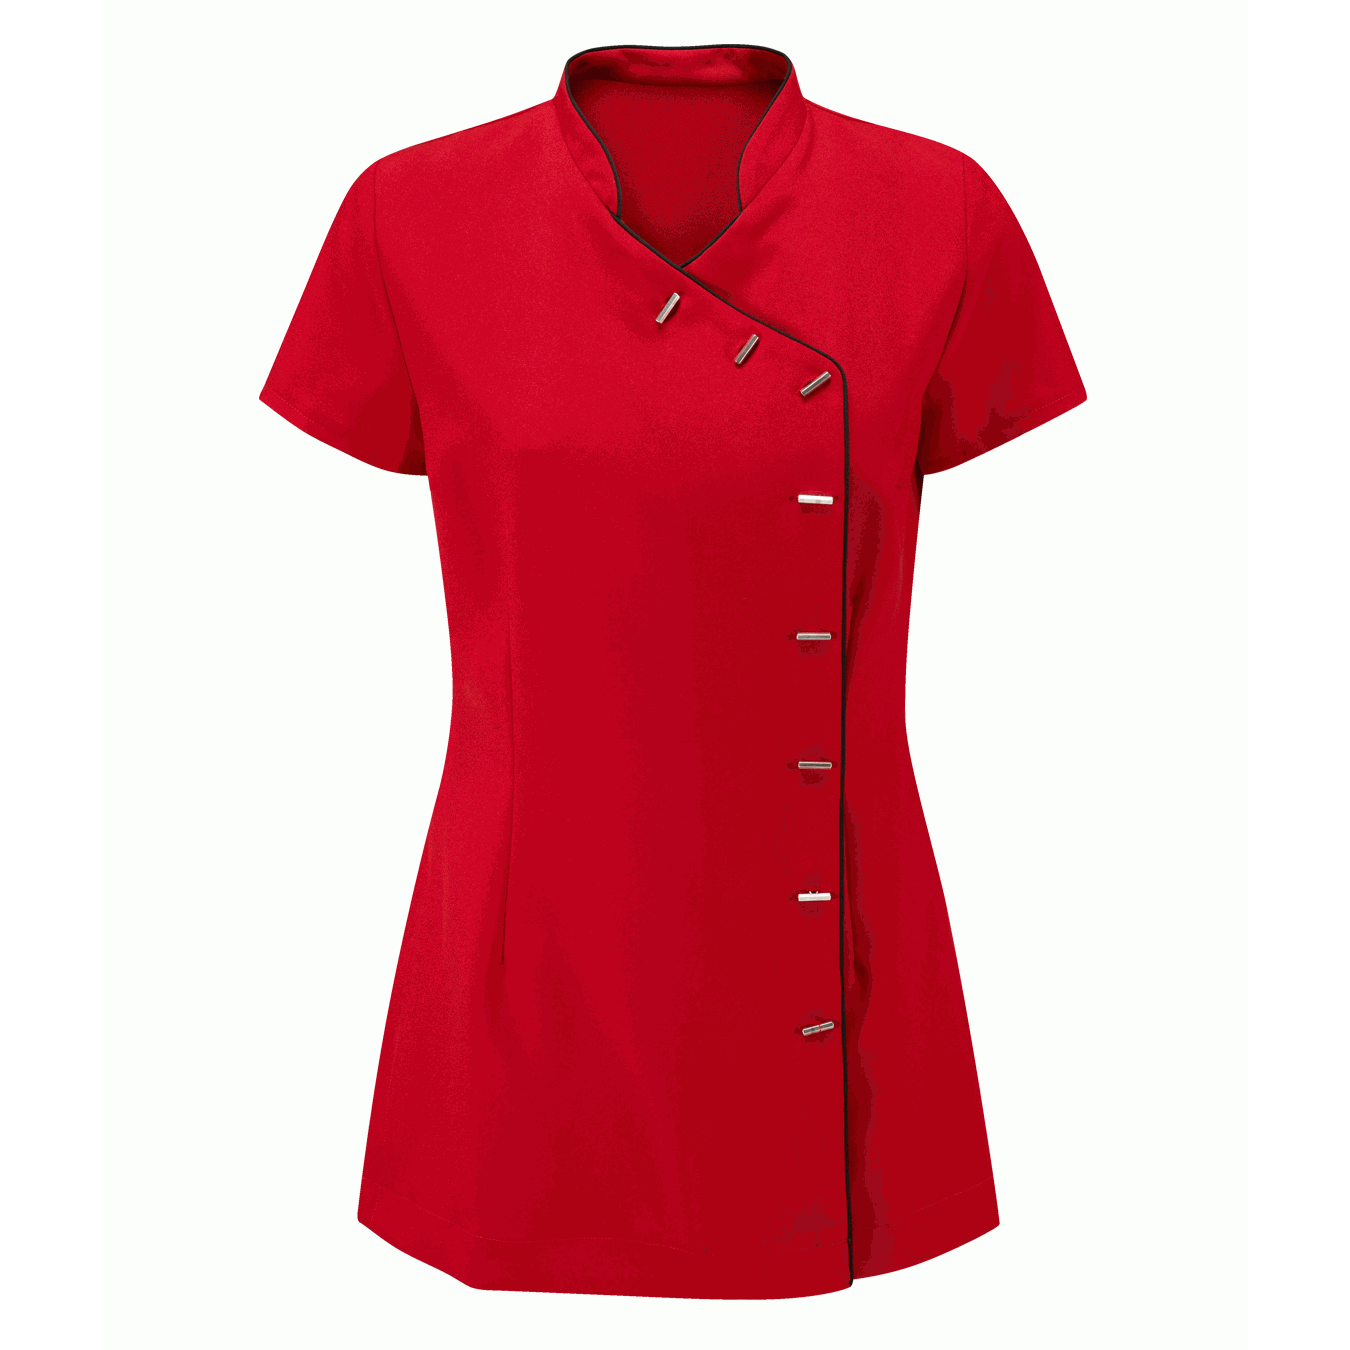 Beauty Tunic contrast Red & Black